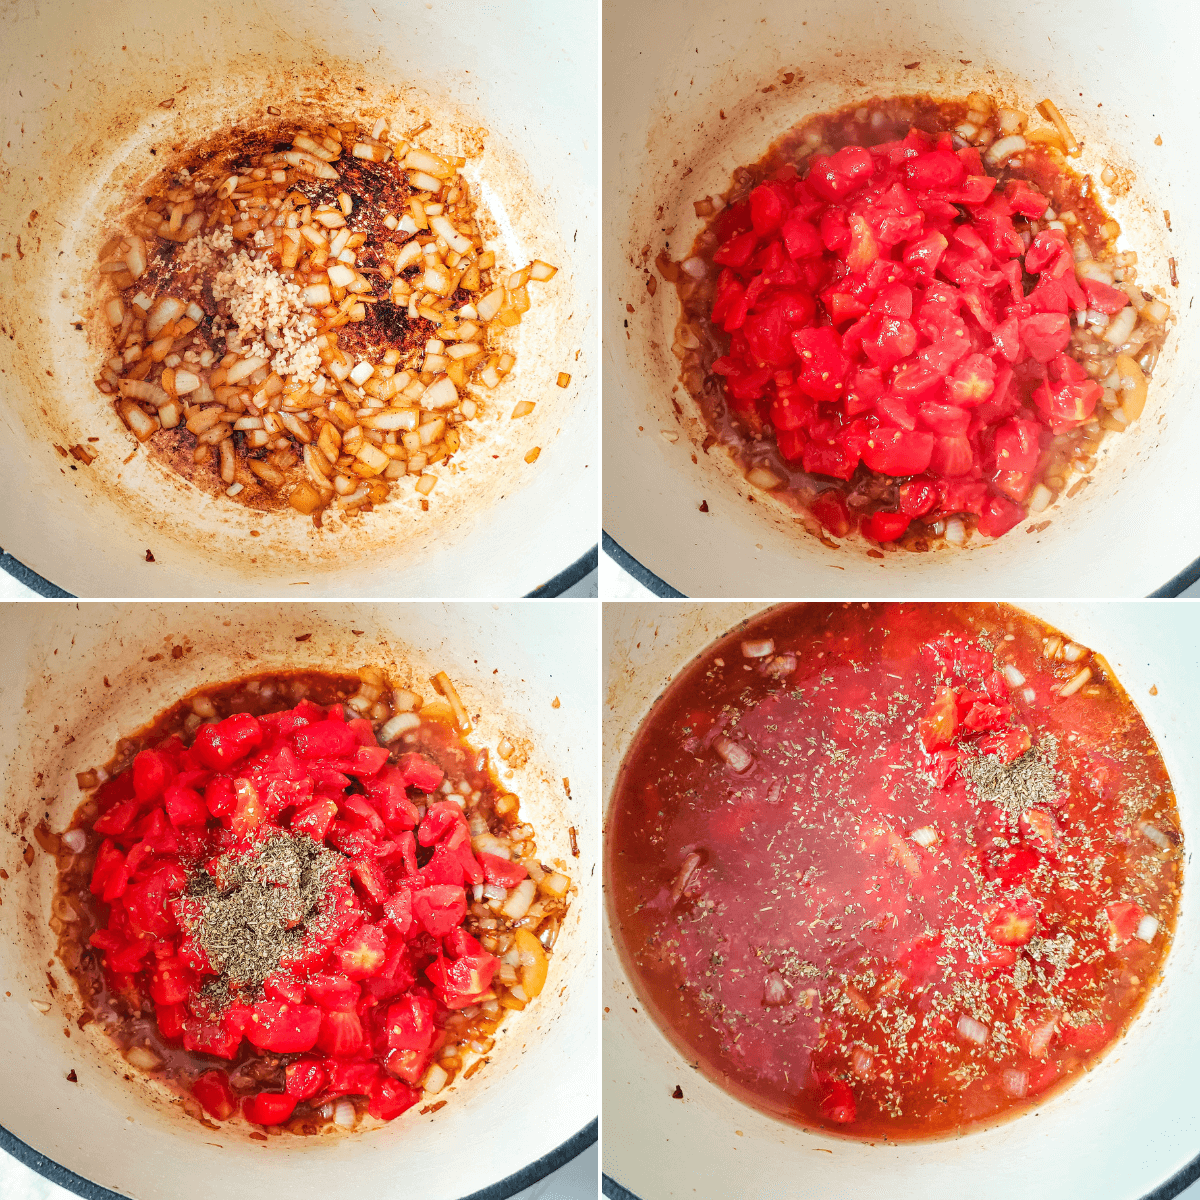 Four photos showing the process of making a sausage and tomato sauce.